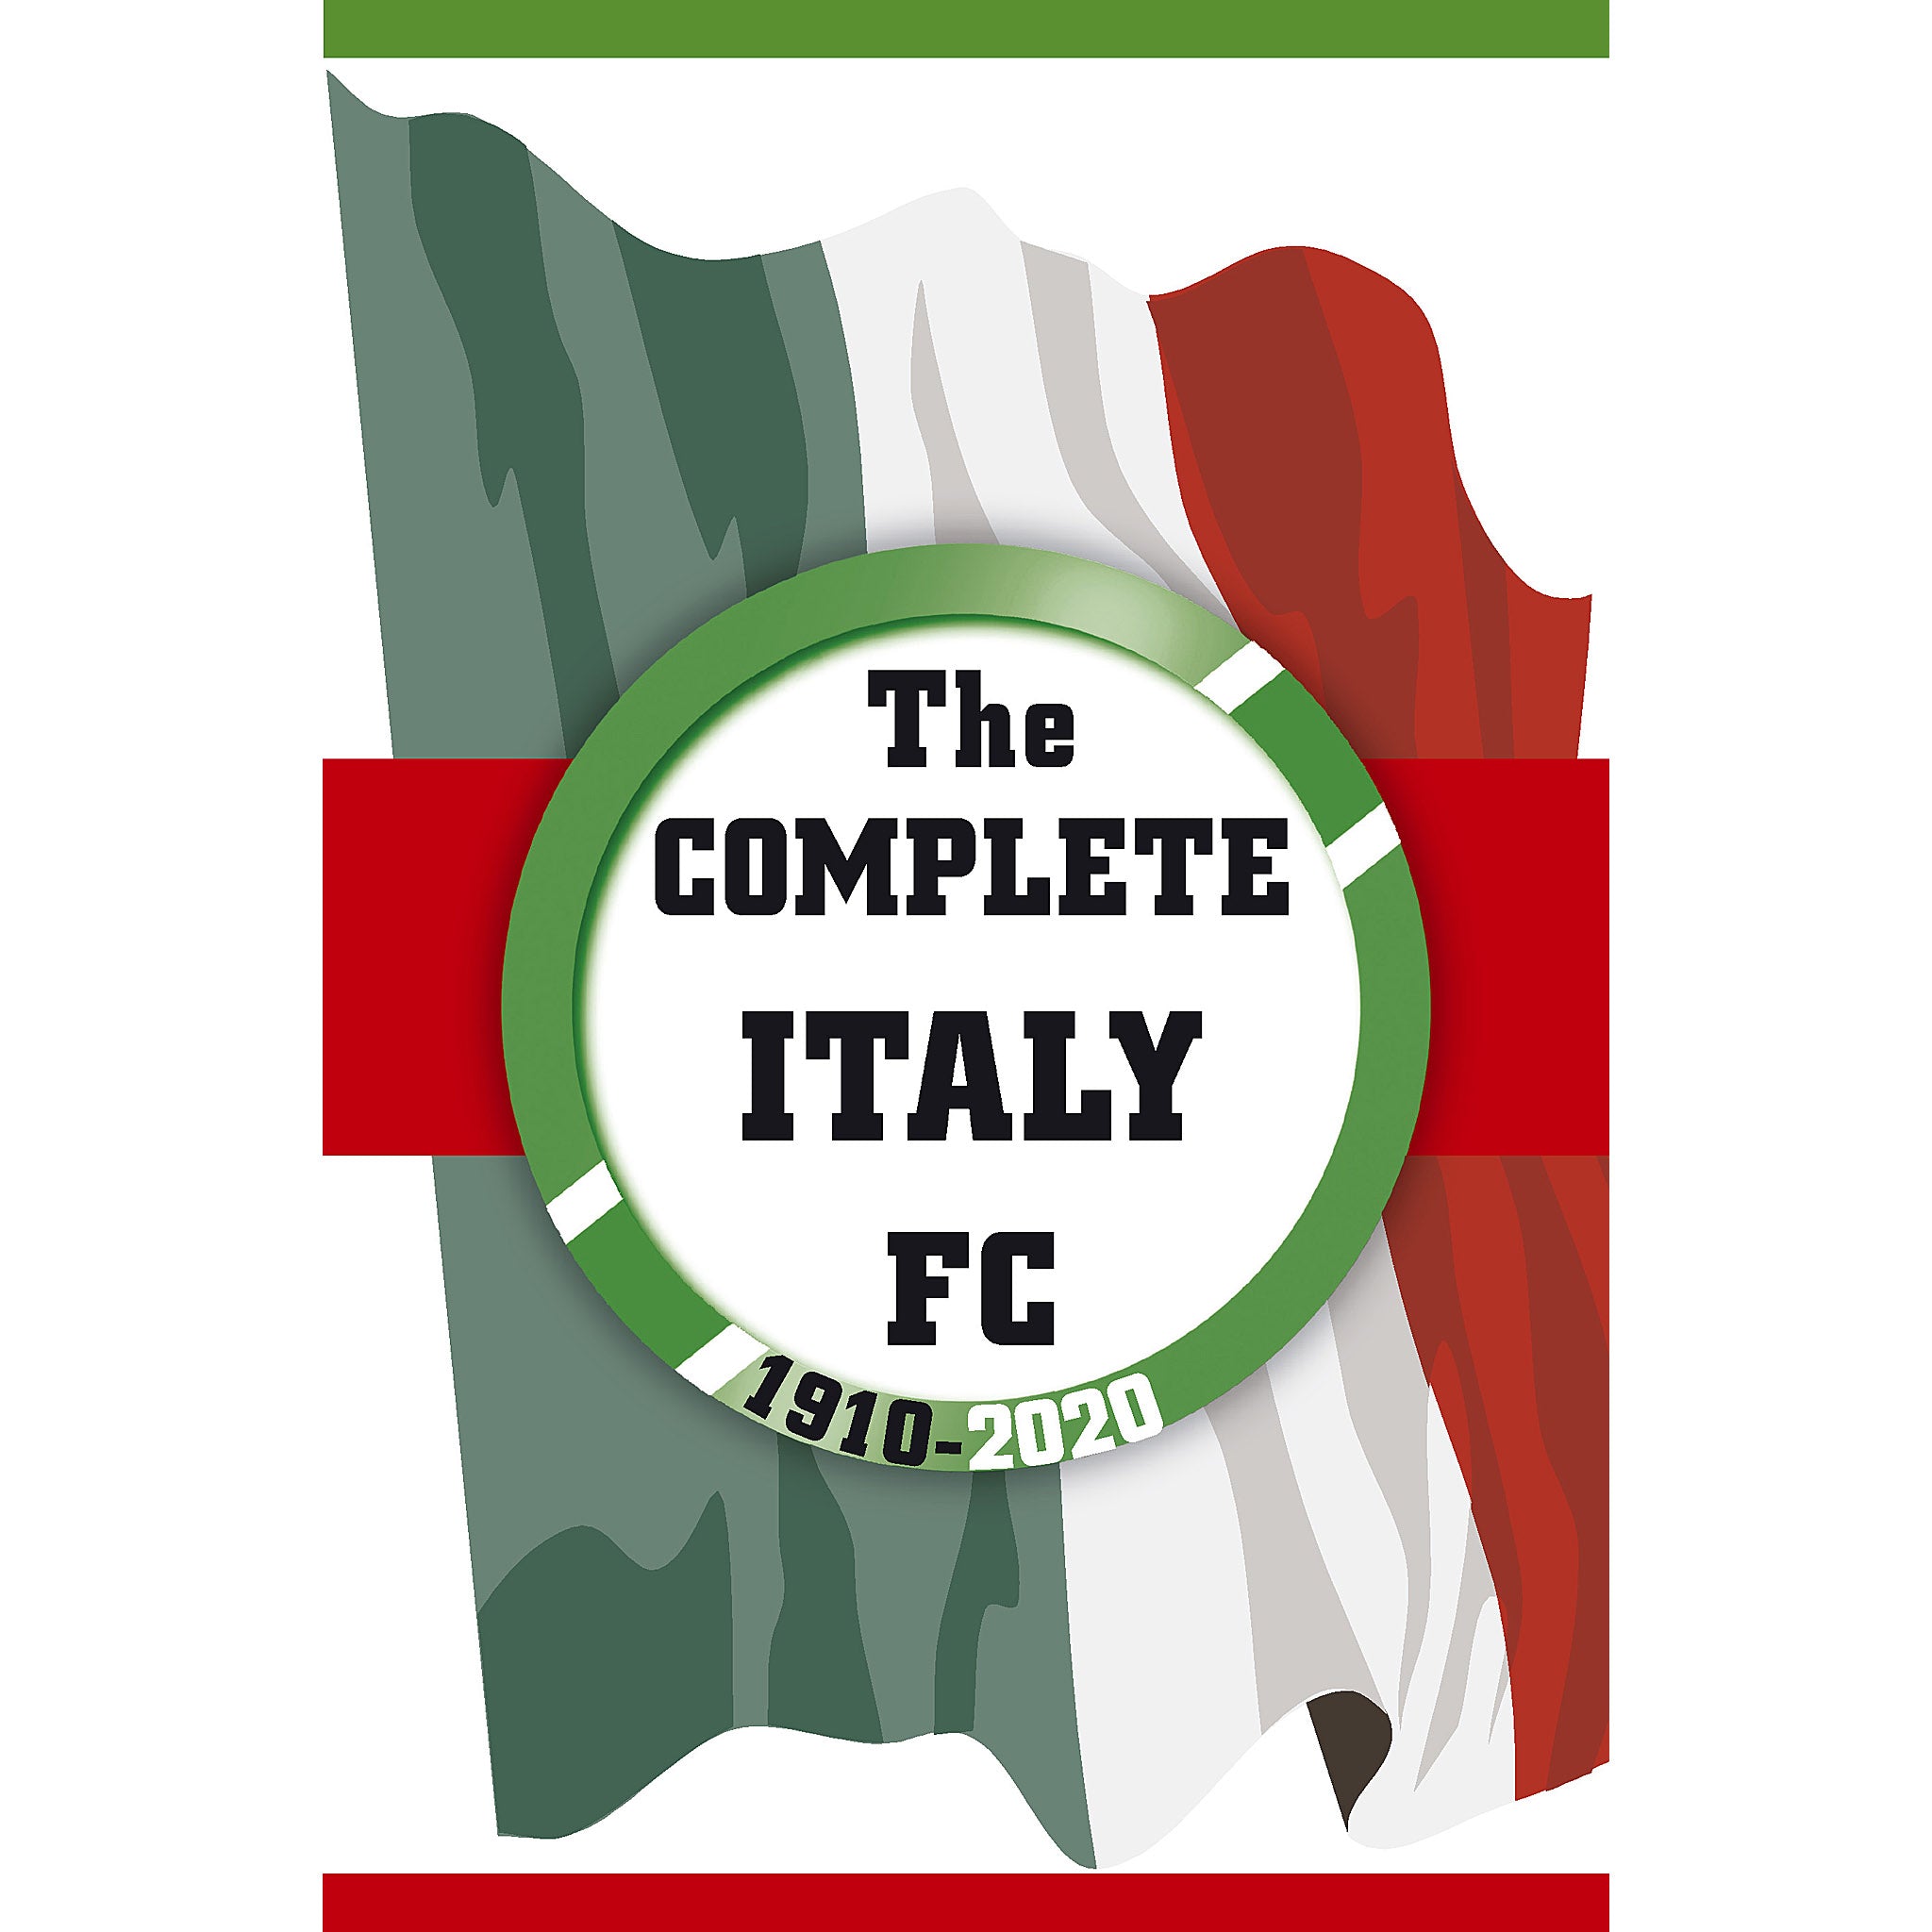 The Complete Italy FC 1910-2020